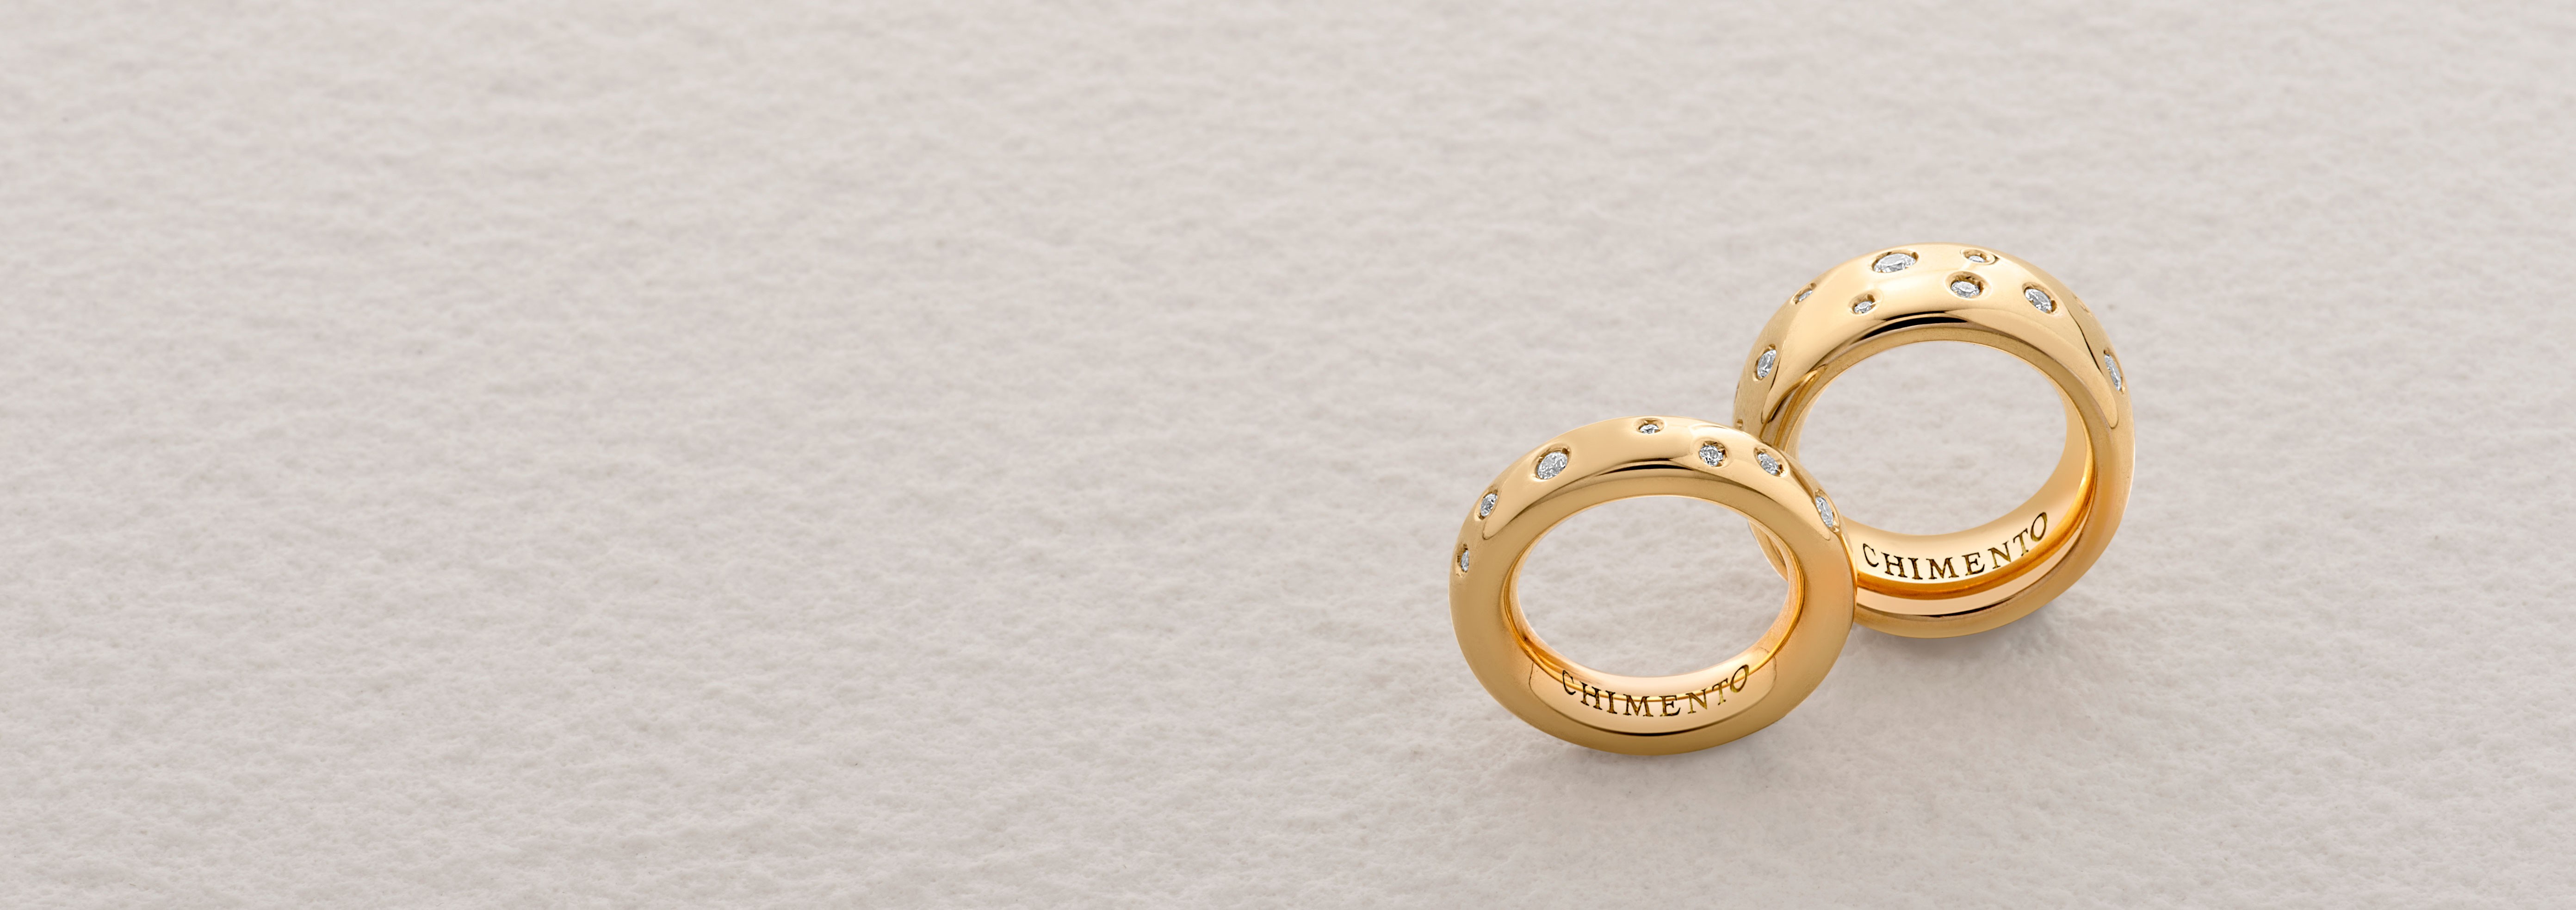 Multi-size band rings in gold and diamonds | FOREVER Brio | CHIMENTO